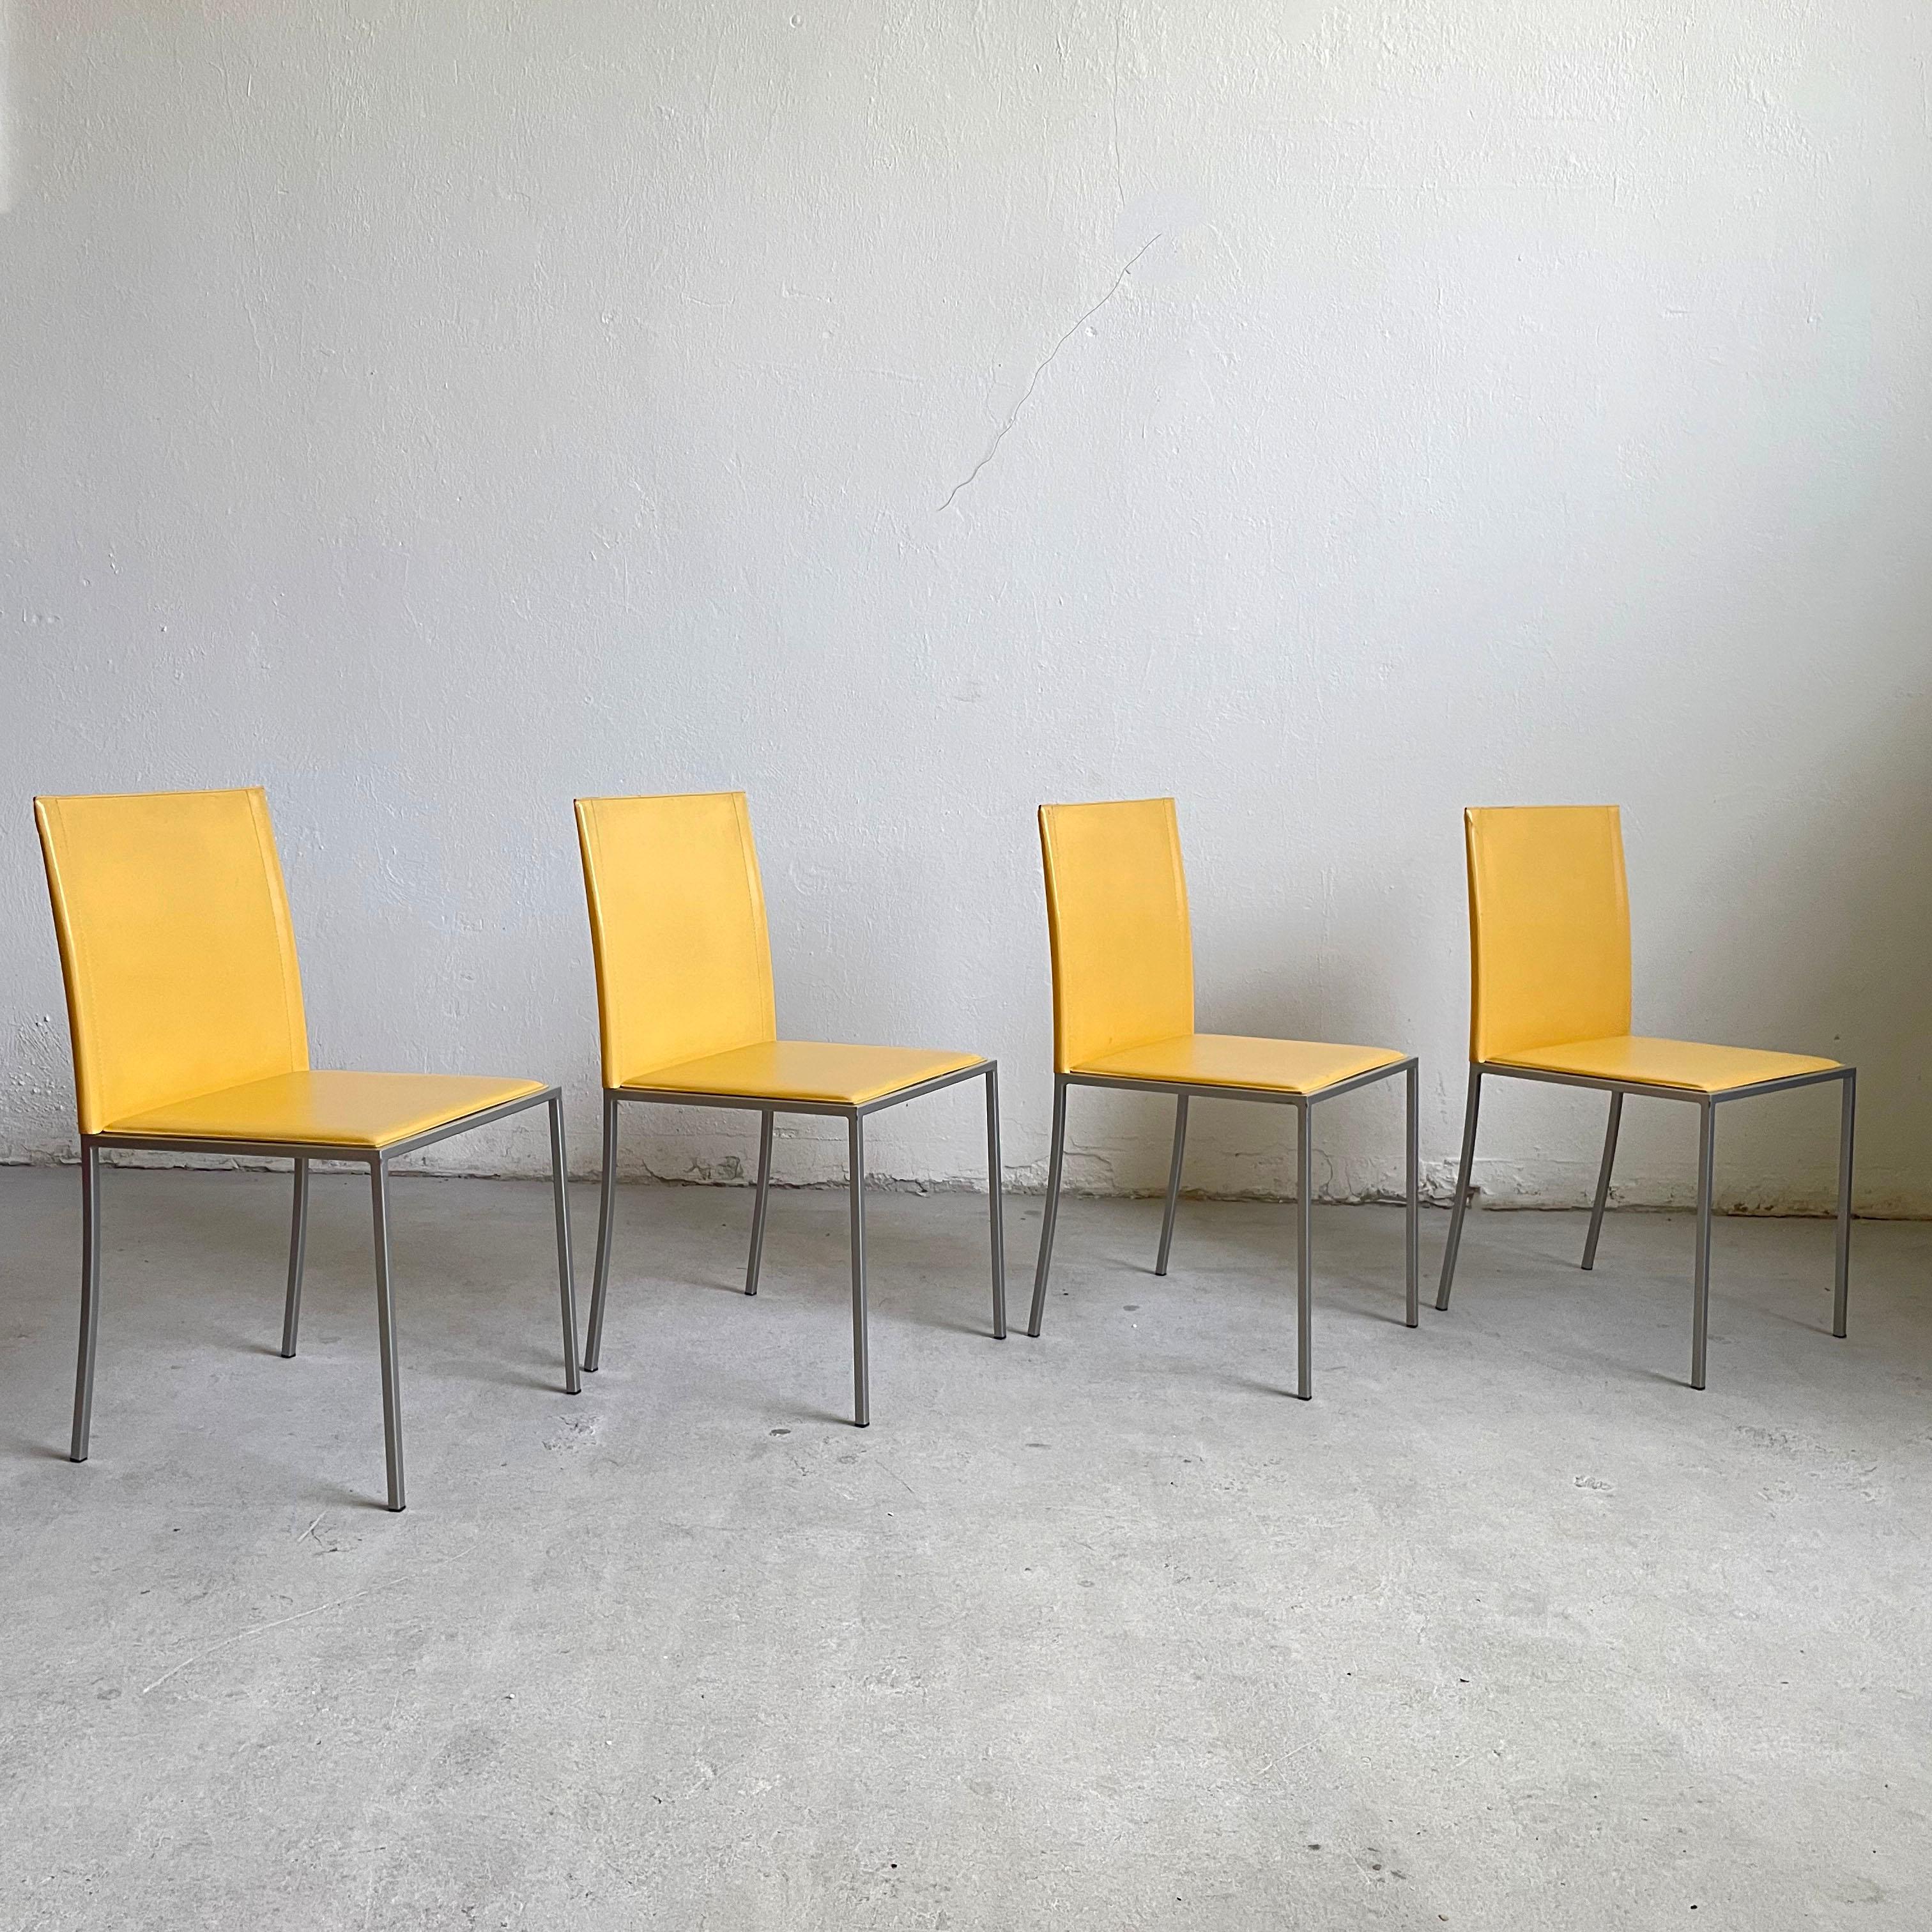 Set of 4 Italian Minimalist Modernist Leather Chairs by Calligaris, Italy 1990s For Sale 1